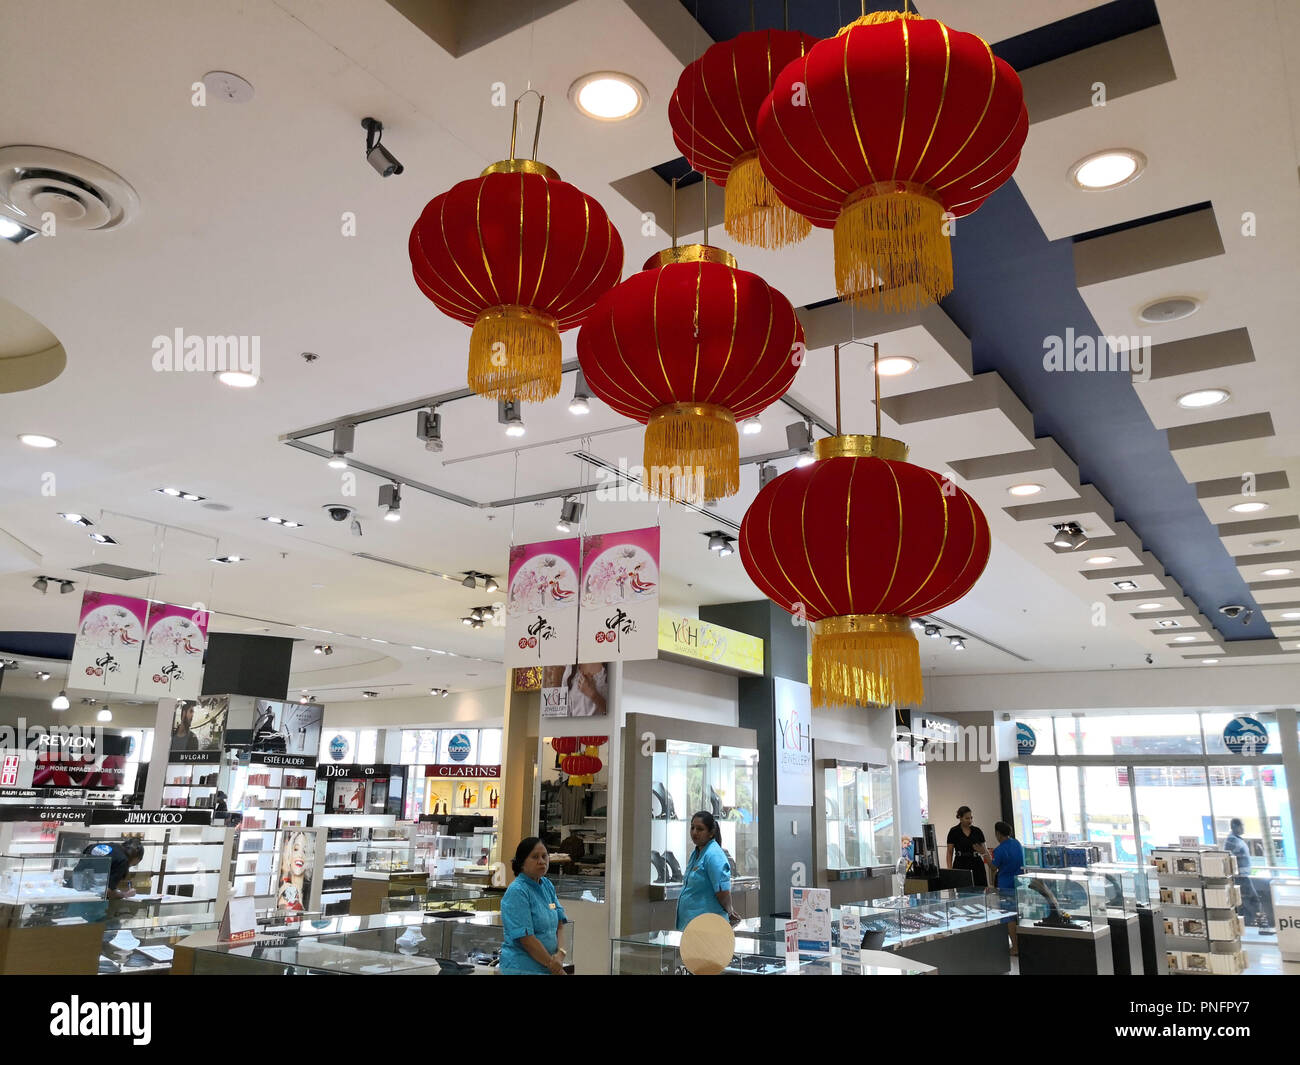 (180921) -- SUVA, Sept. 21, 2018 (Xinhua) -- Photo taken on Sept. 17, 2018 shows Chinese lanterns decorated in a shopping mall in Suva, Fiji. Shopping malls in Suva started their sales promotional activities before the upcoming Chinese Mid-Autumn Festival to attract more customers. (Xinhua/Zhang Yongxing) Stock Photo